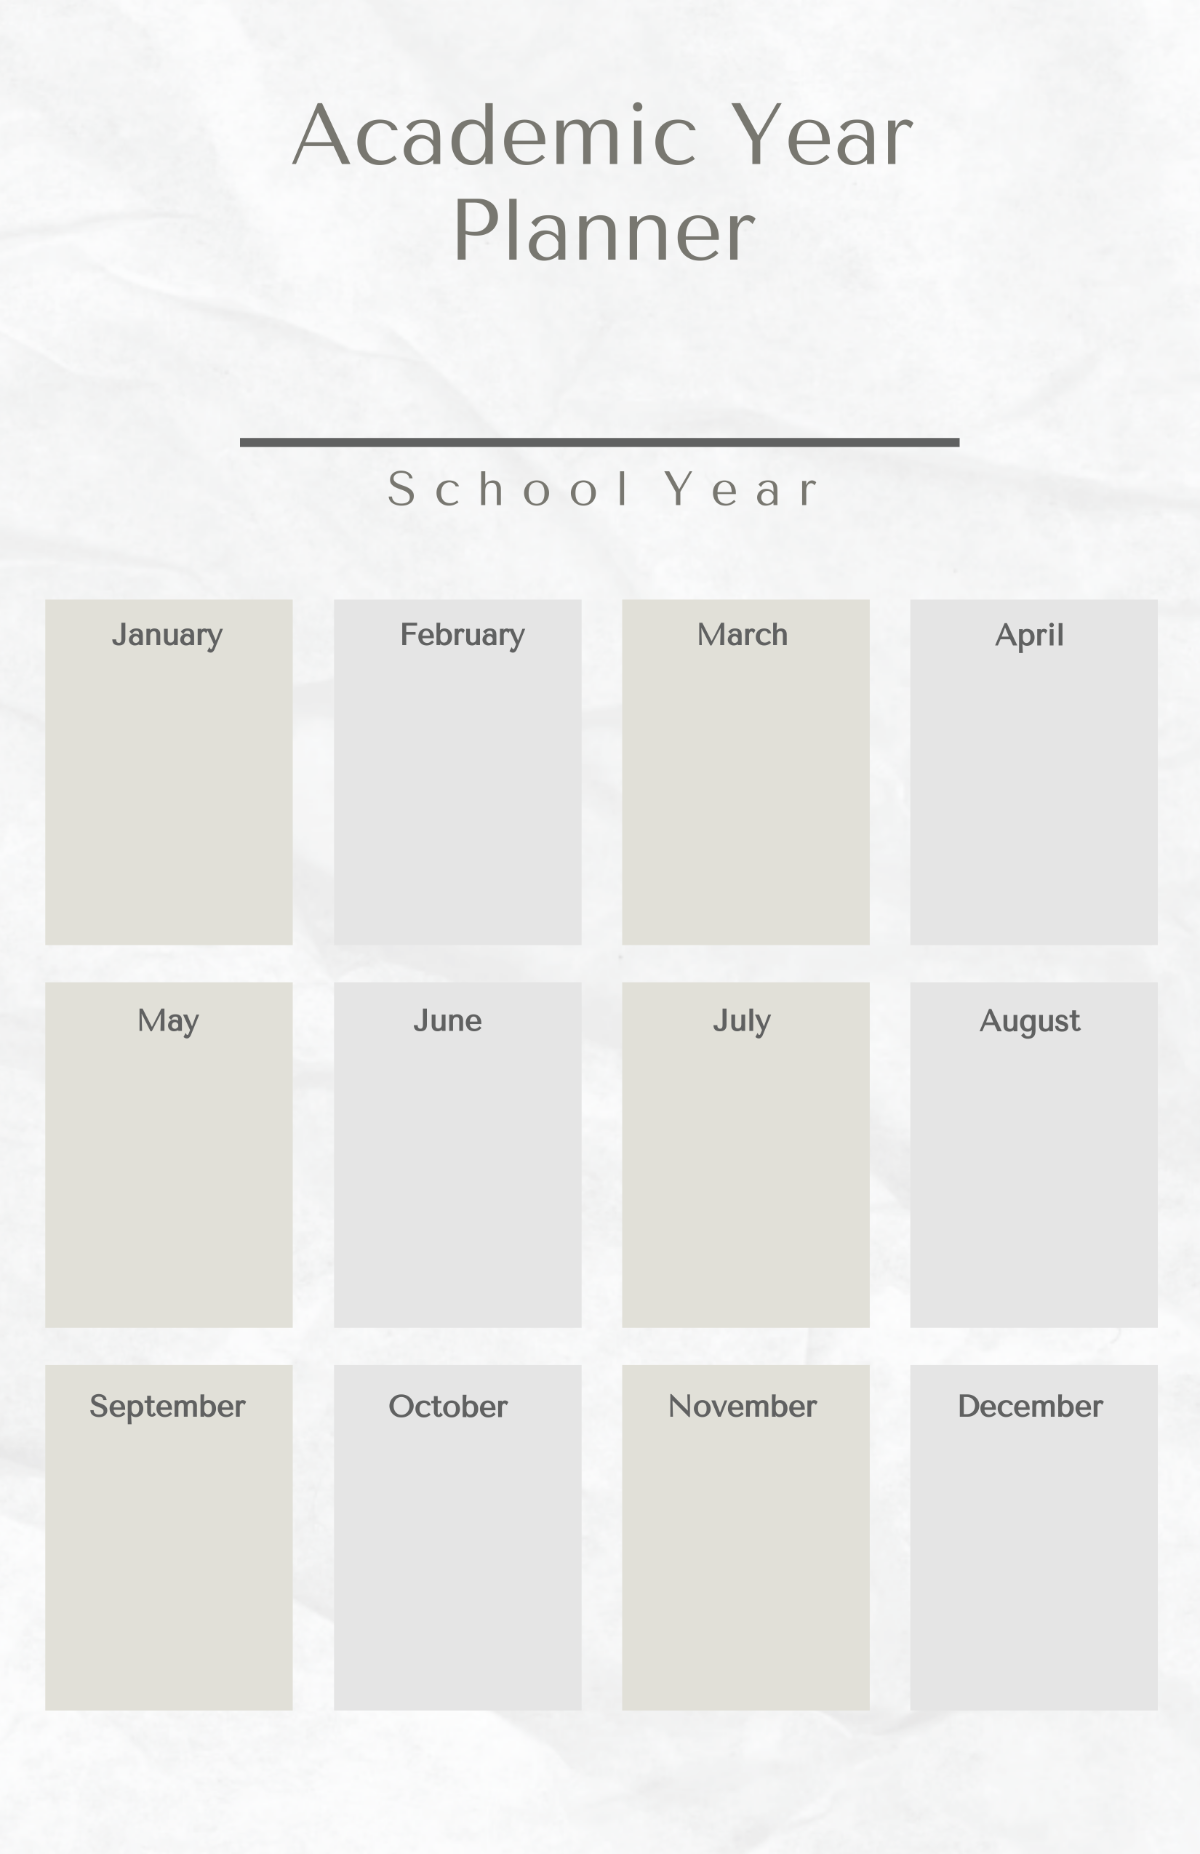 Free Academic Year Planner Poster Template